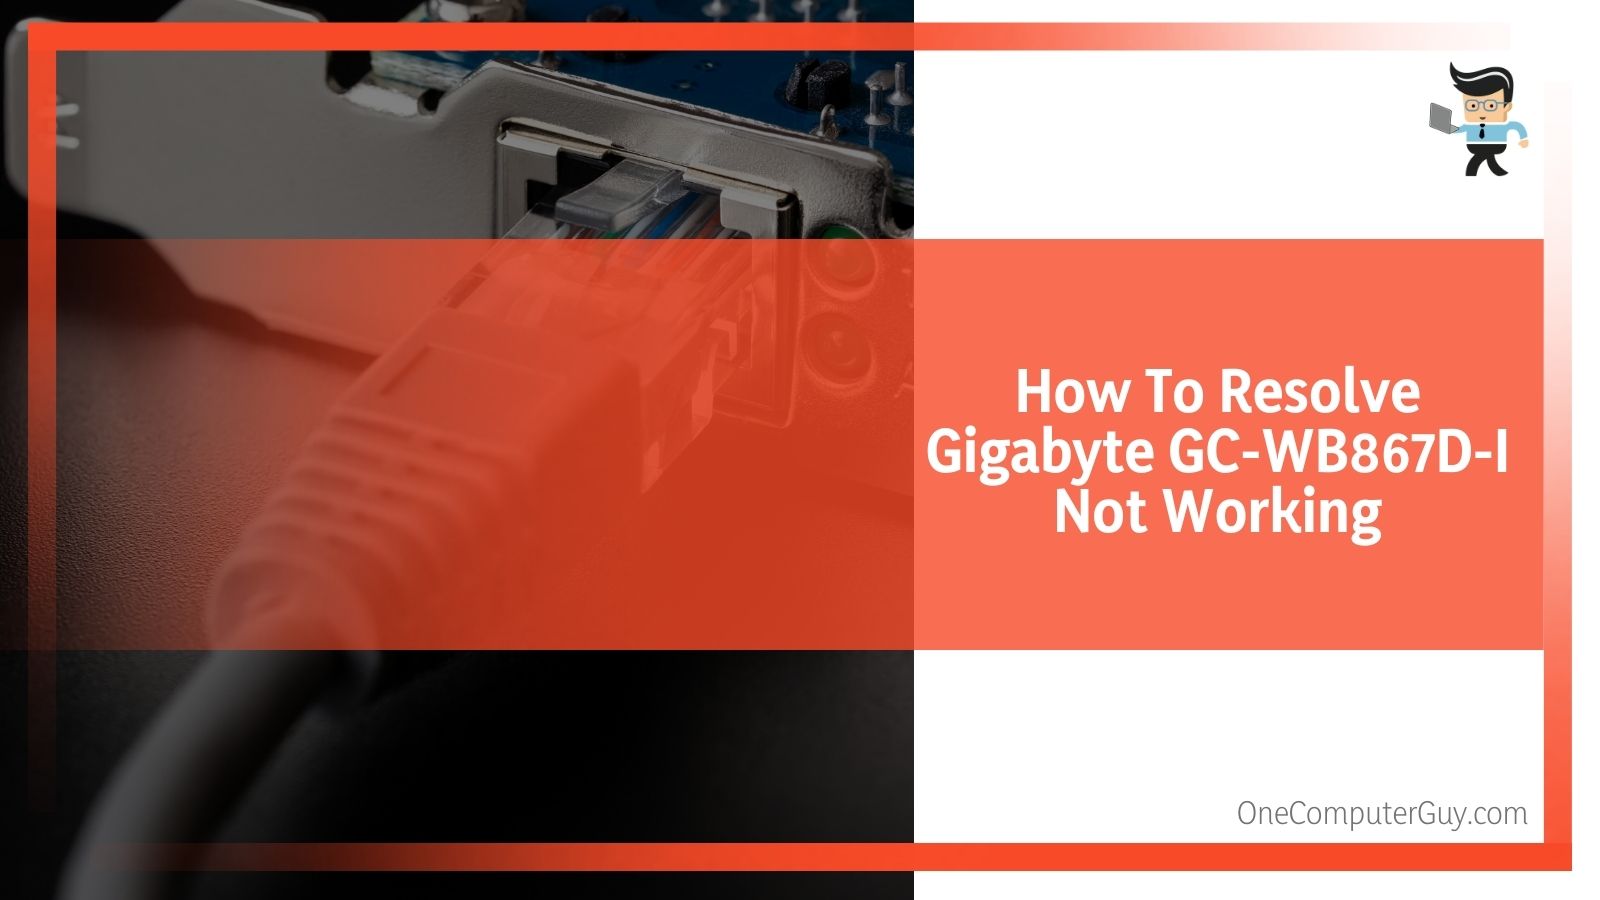 How To Resolve Gigabyte GC-WB867D-I Not Working